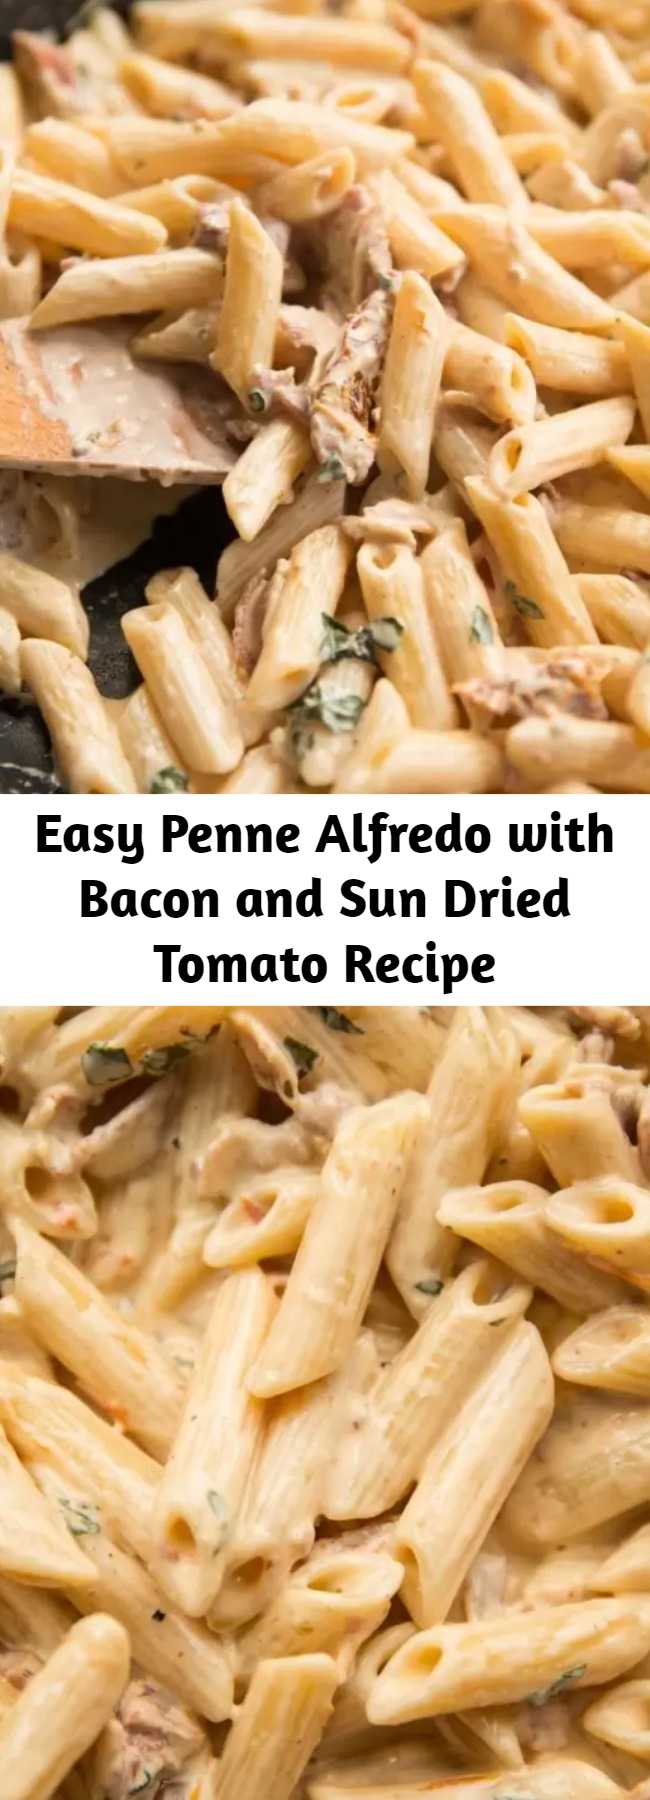 Easy Penne Alfredo with Bacon and Sun Dried Tomato Recipe - A delicious twist on the classic Alfredo. Penne Alfredo with Bacon and Sun Dried Tomato will change your 'go to' quick dinner forever. #bacon #penne #alfredo #pennealfredo #pasta #creamypasta